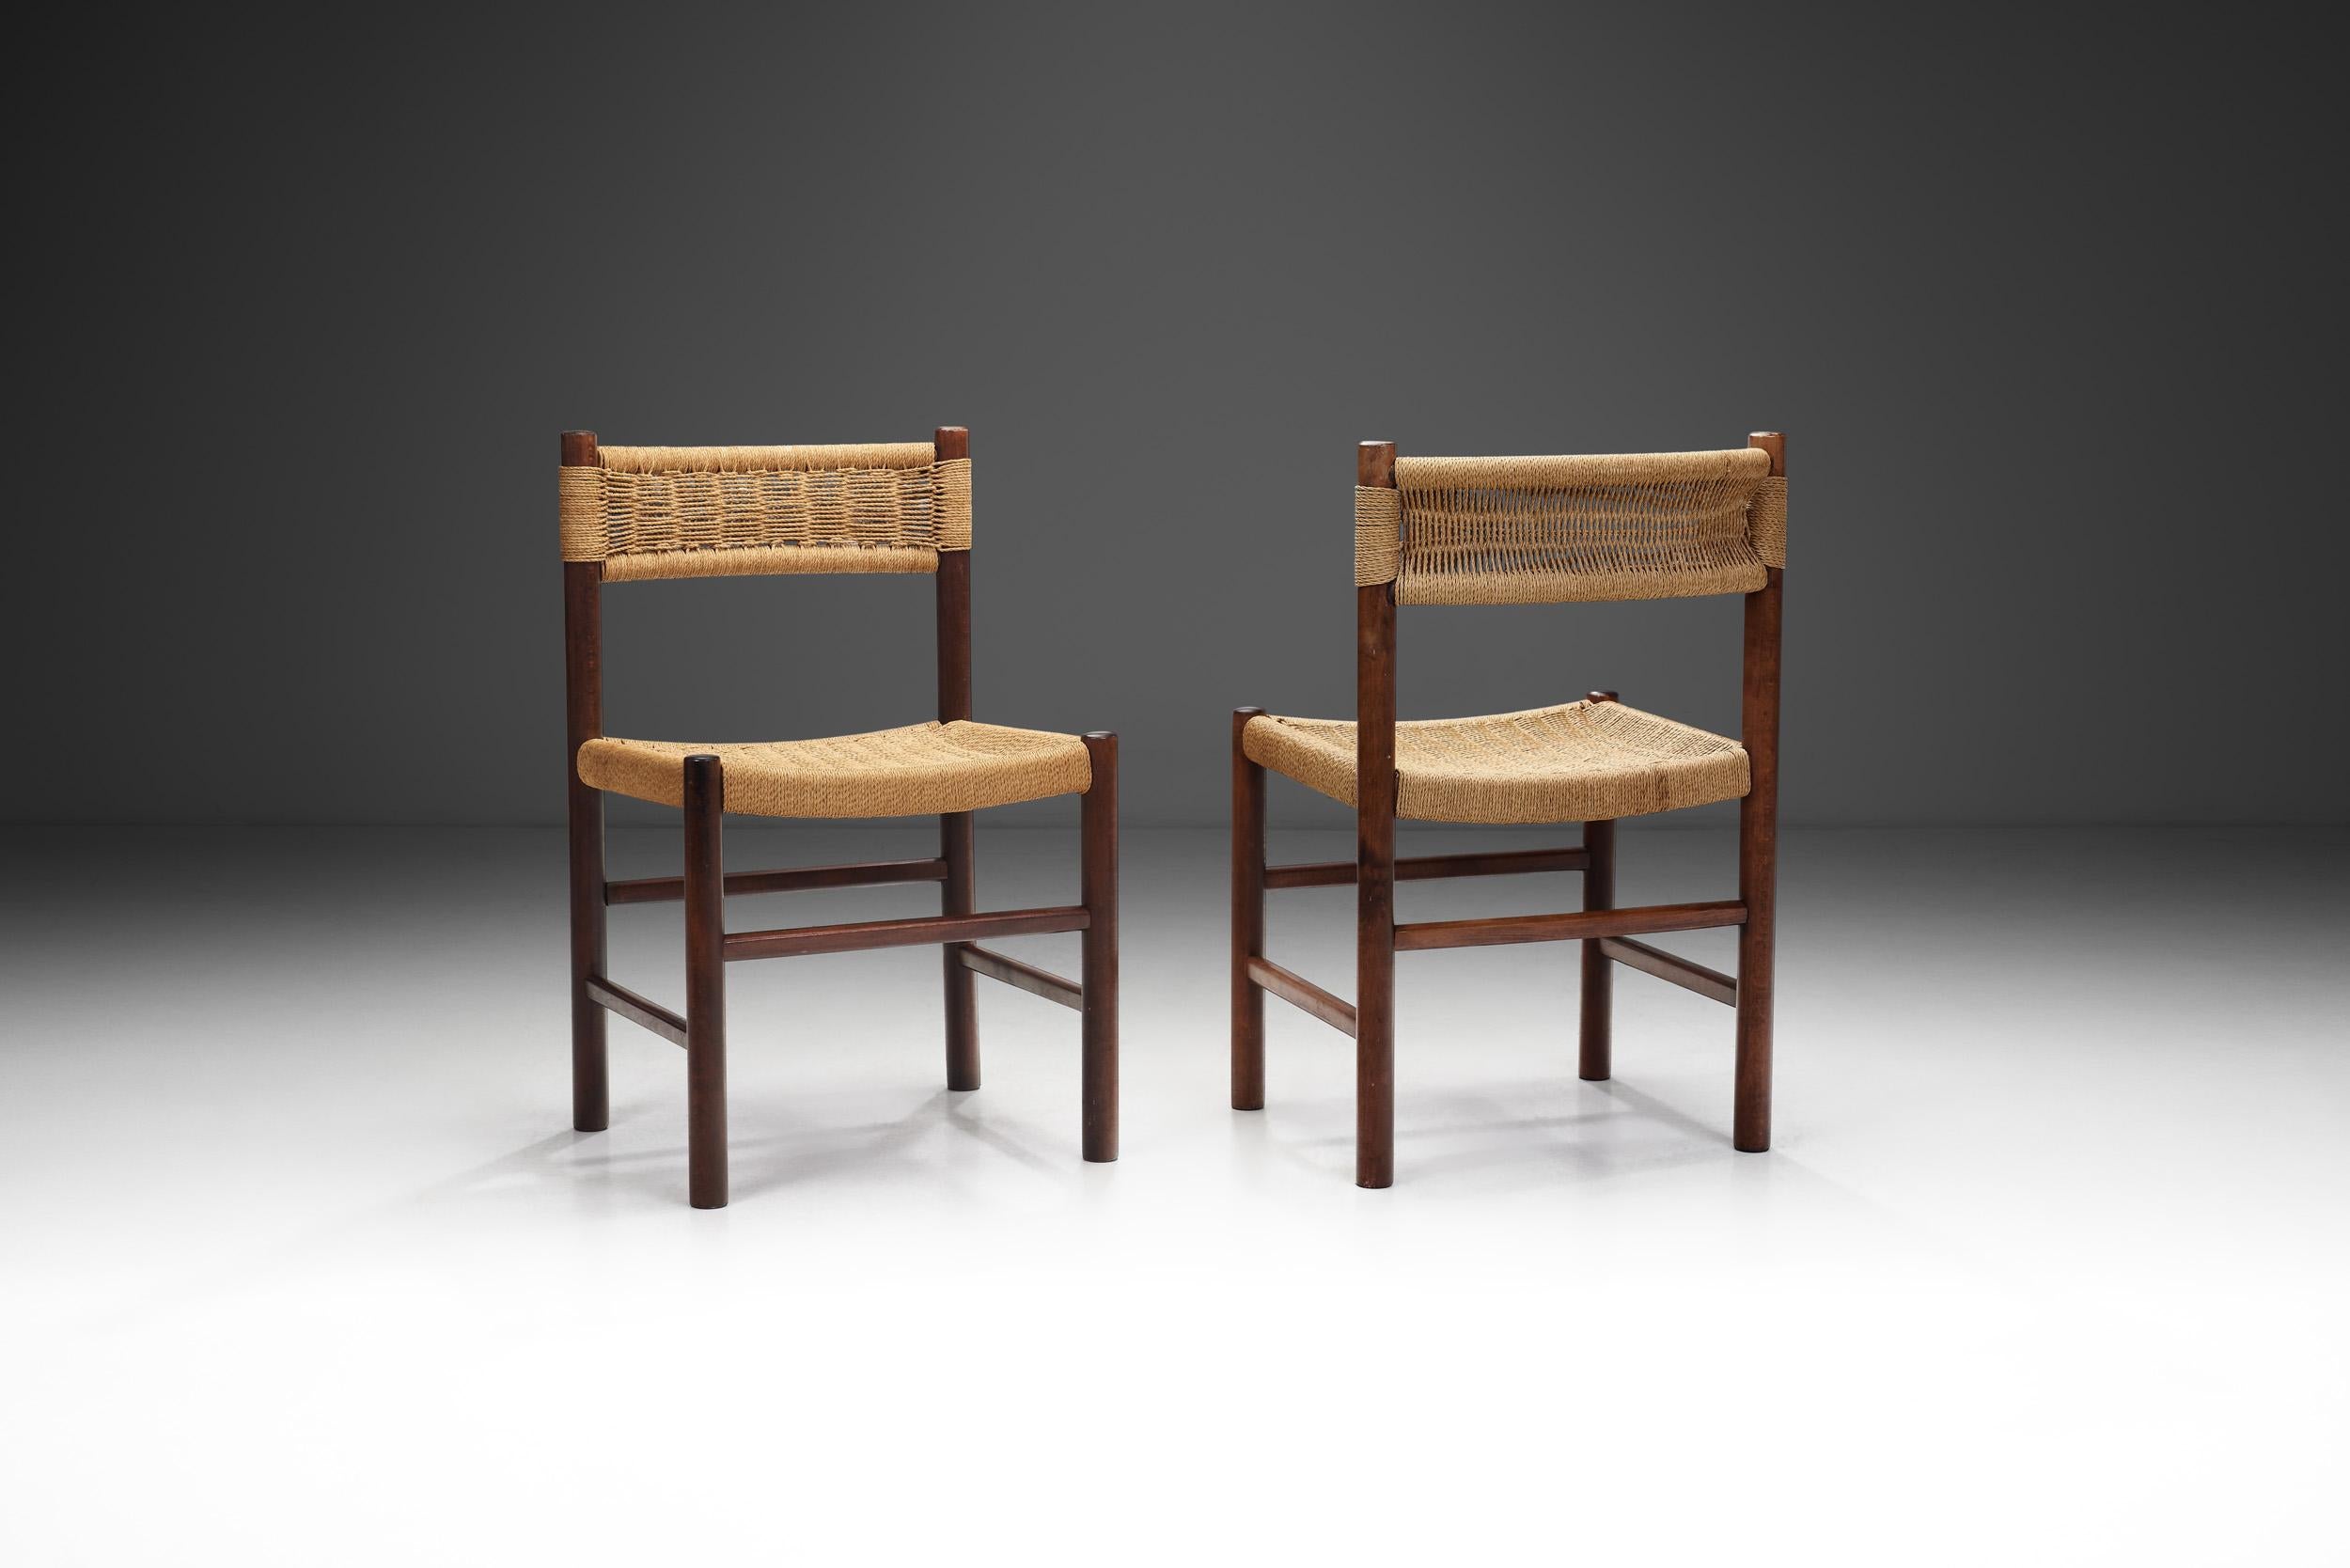 European “Dordogne” style Chairs with Woven Papercord Seats and Backs, Europe ca 1960s